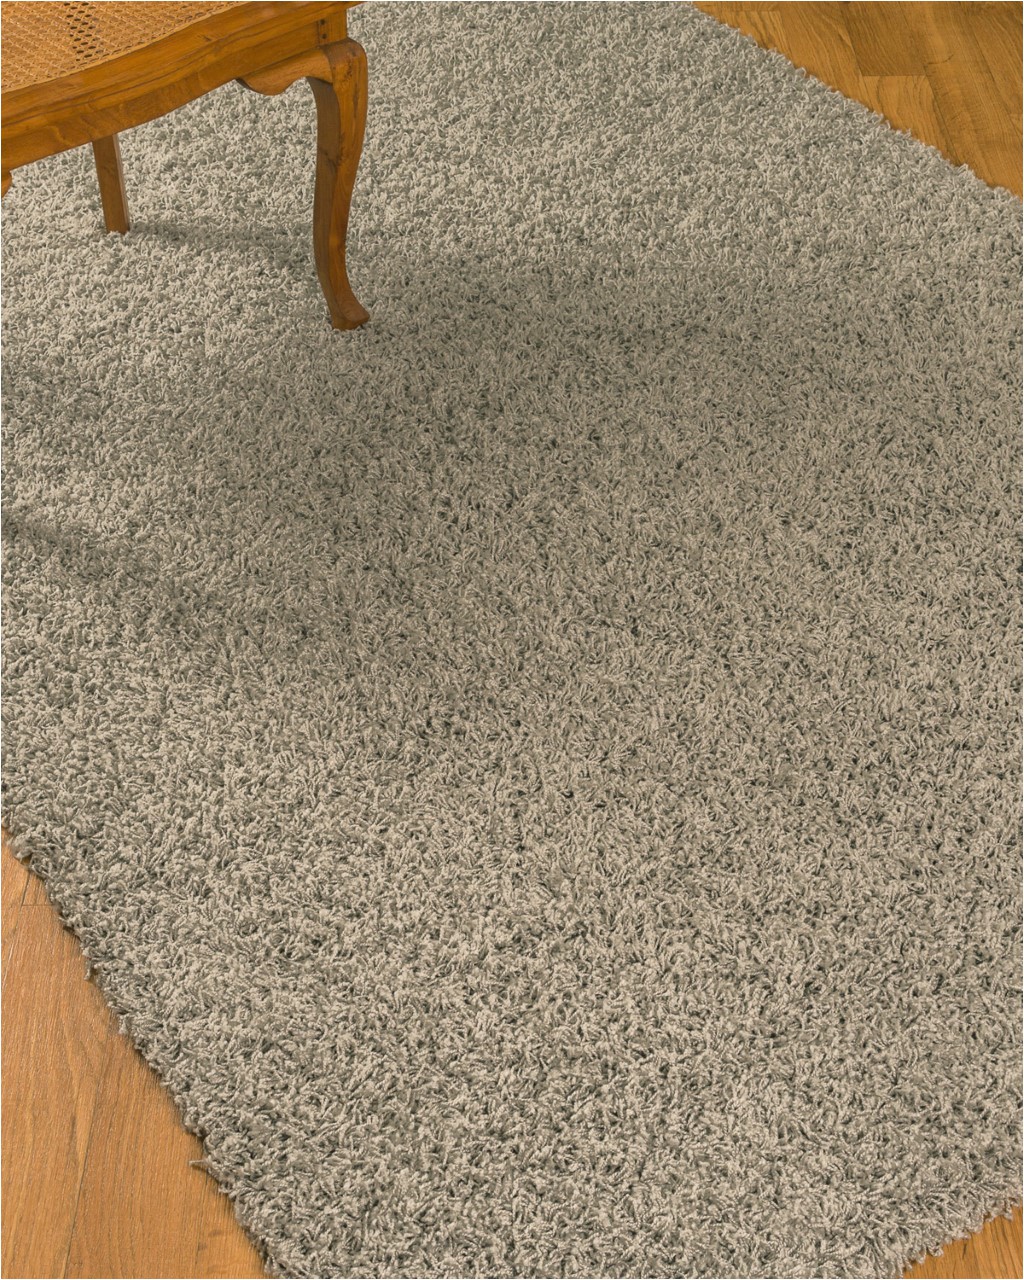 Better Homes and Gardens Shaded Lines area Rug Natural area Rugs isla Shag Gray area Rug